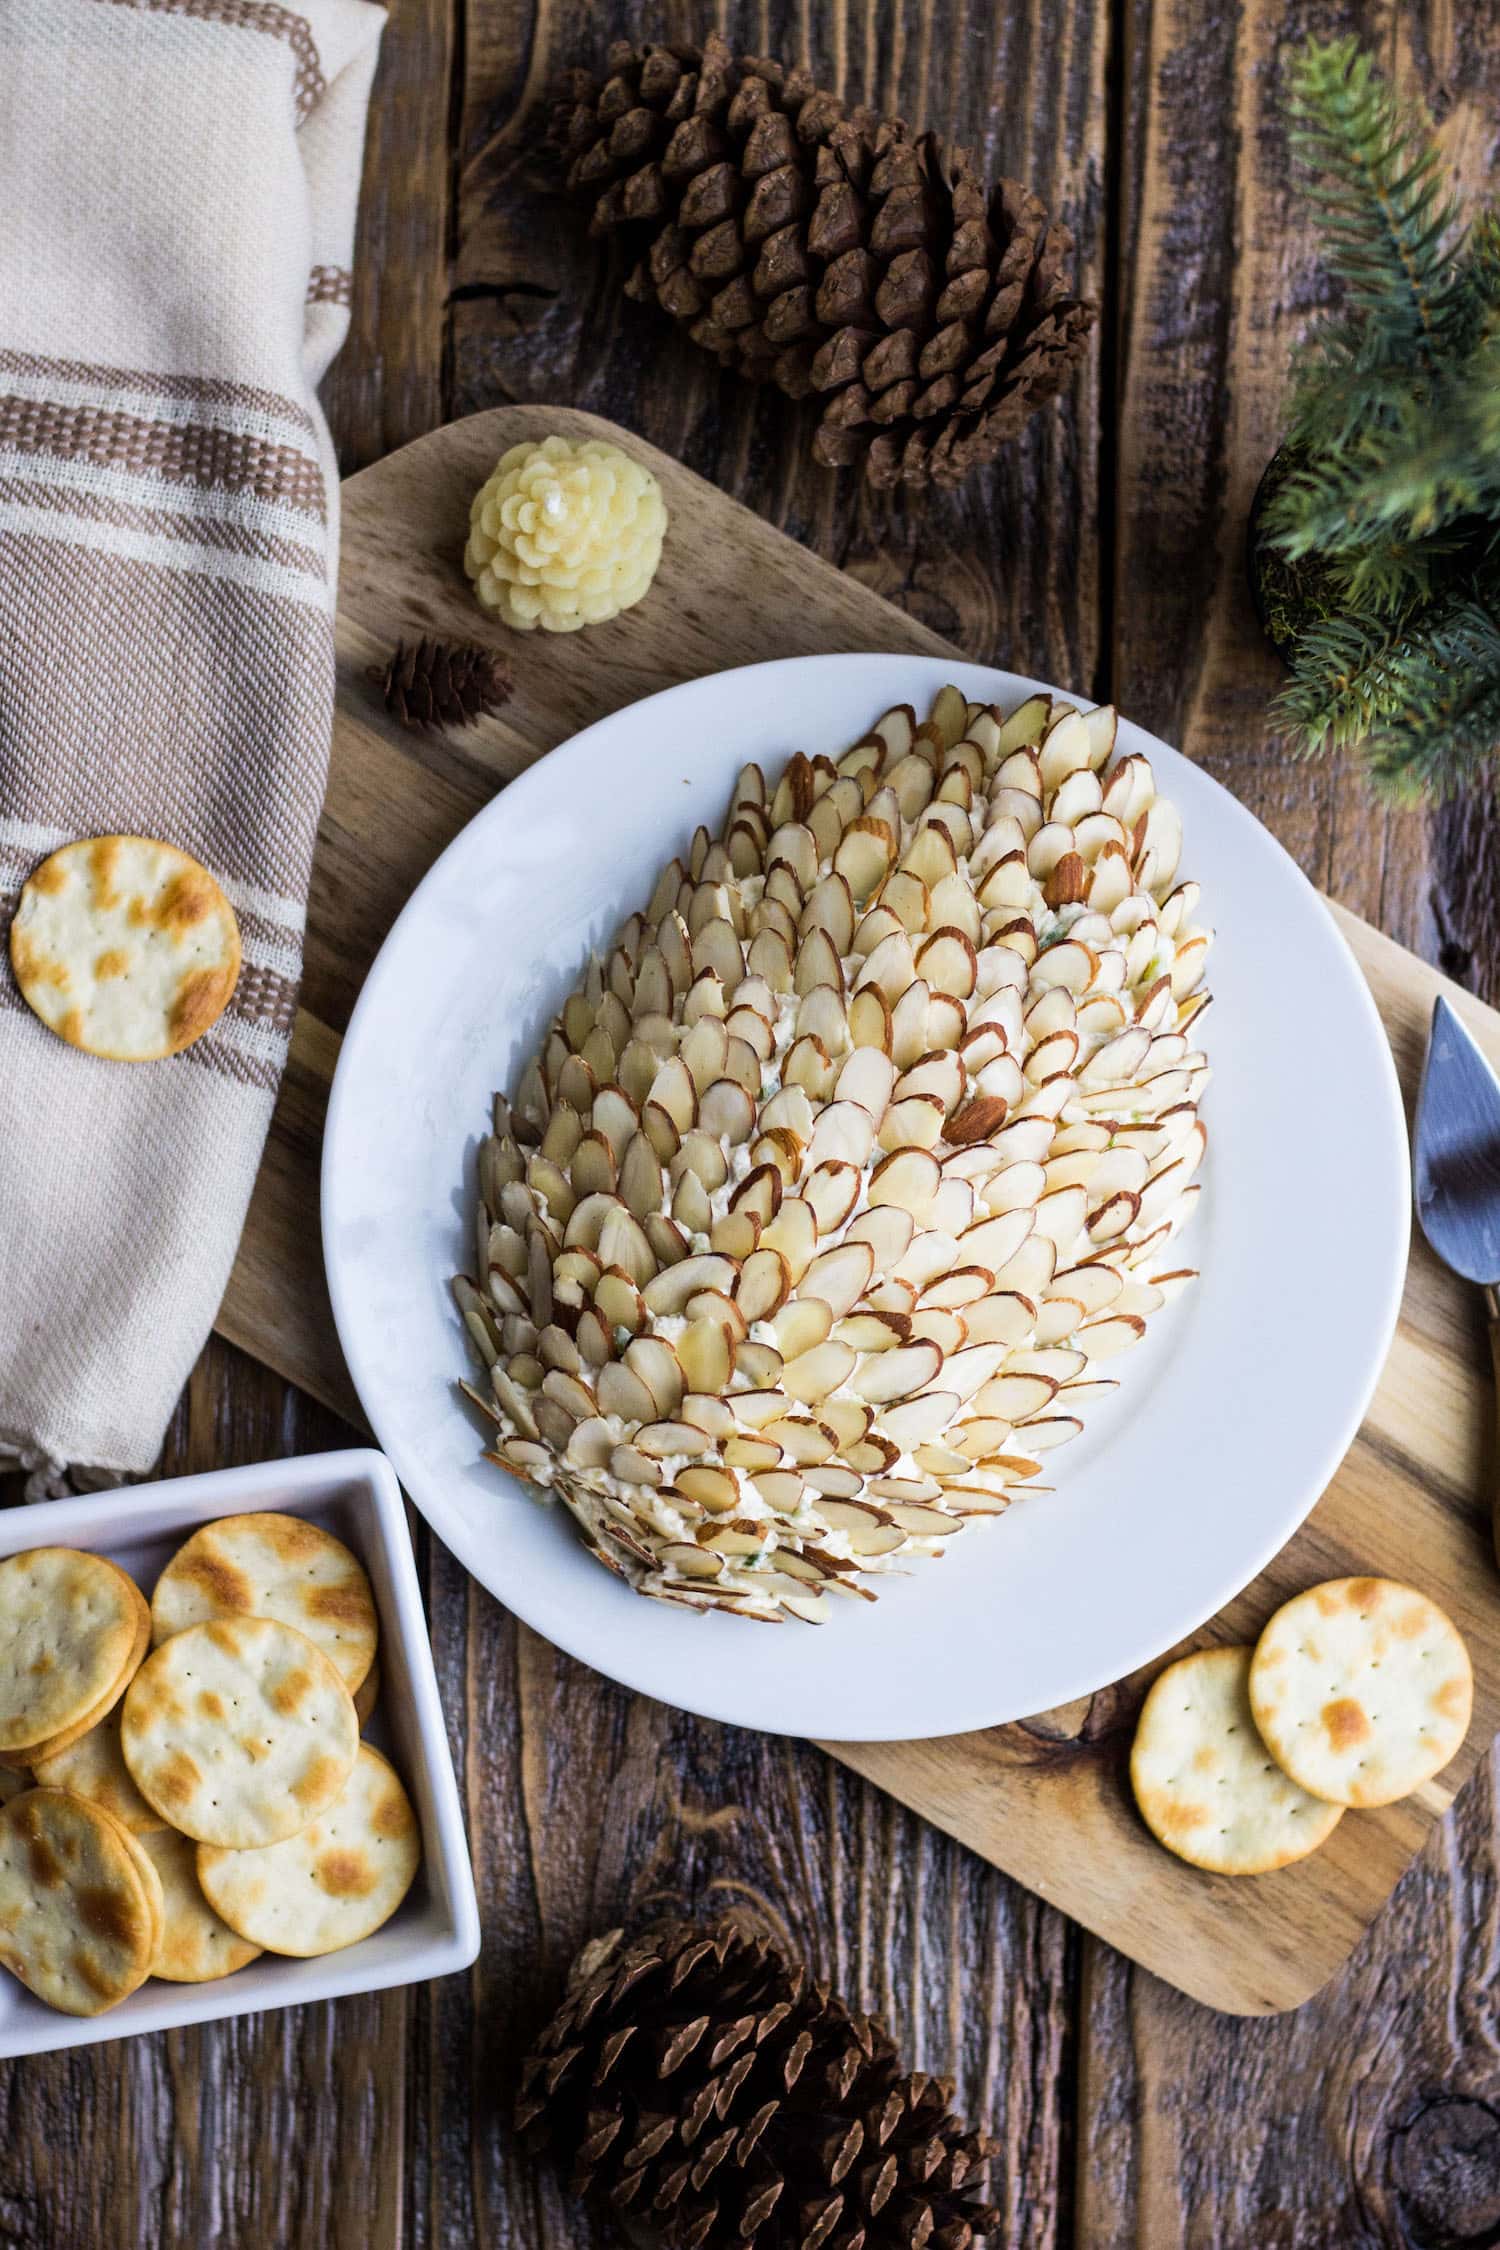 A pineapple cheese ball covered in almonds looking like a pinecone